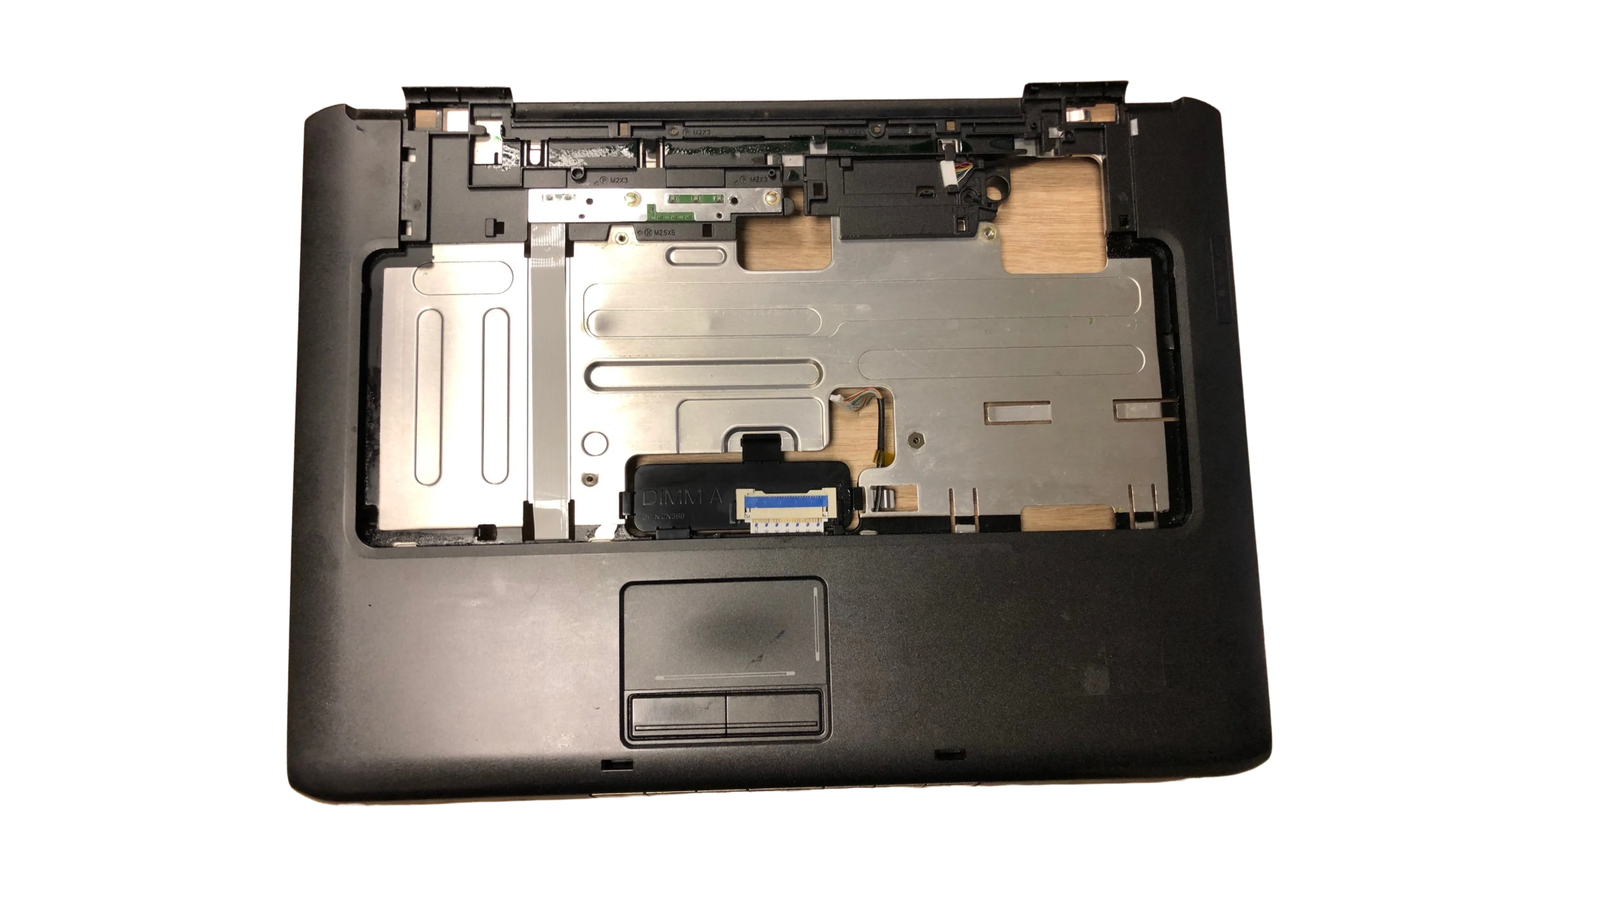 0NW686 PALMREST WITH TOUCHPAD FOR DELL VOSTRO 1500